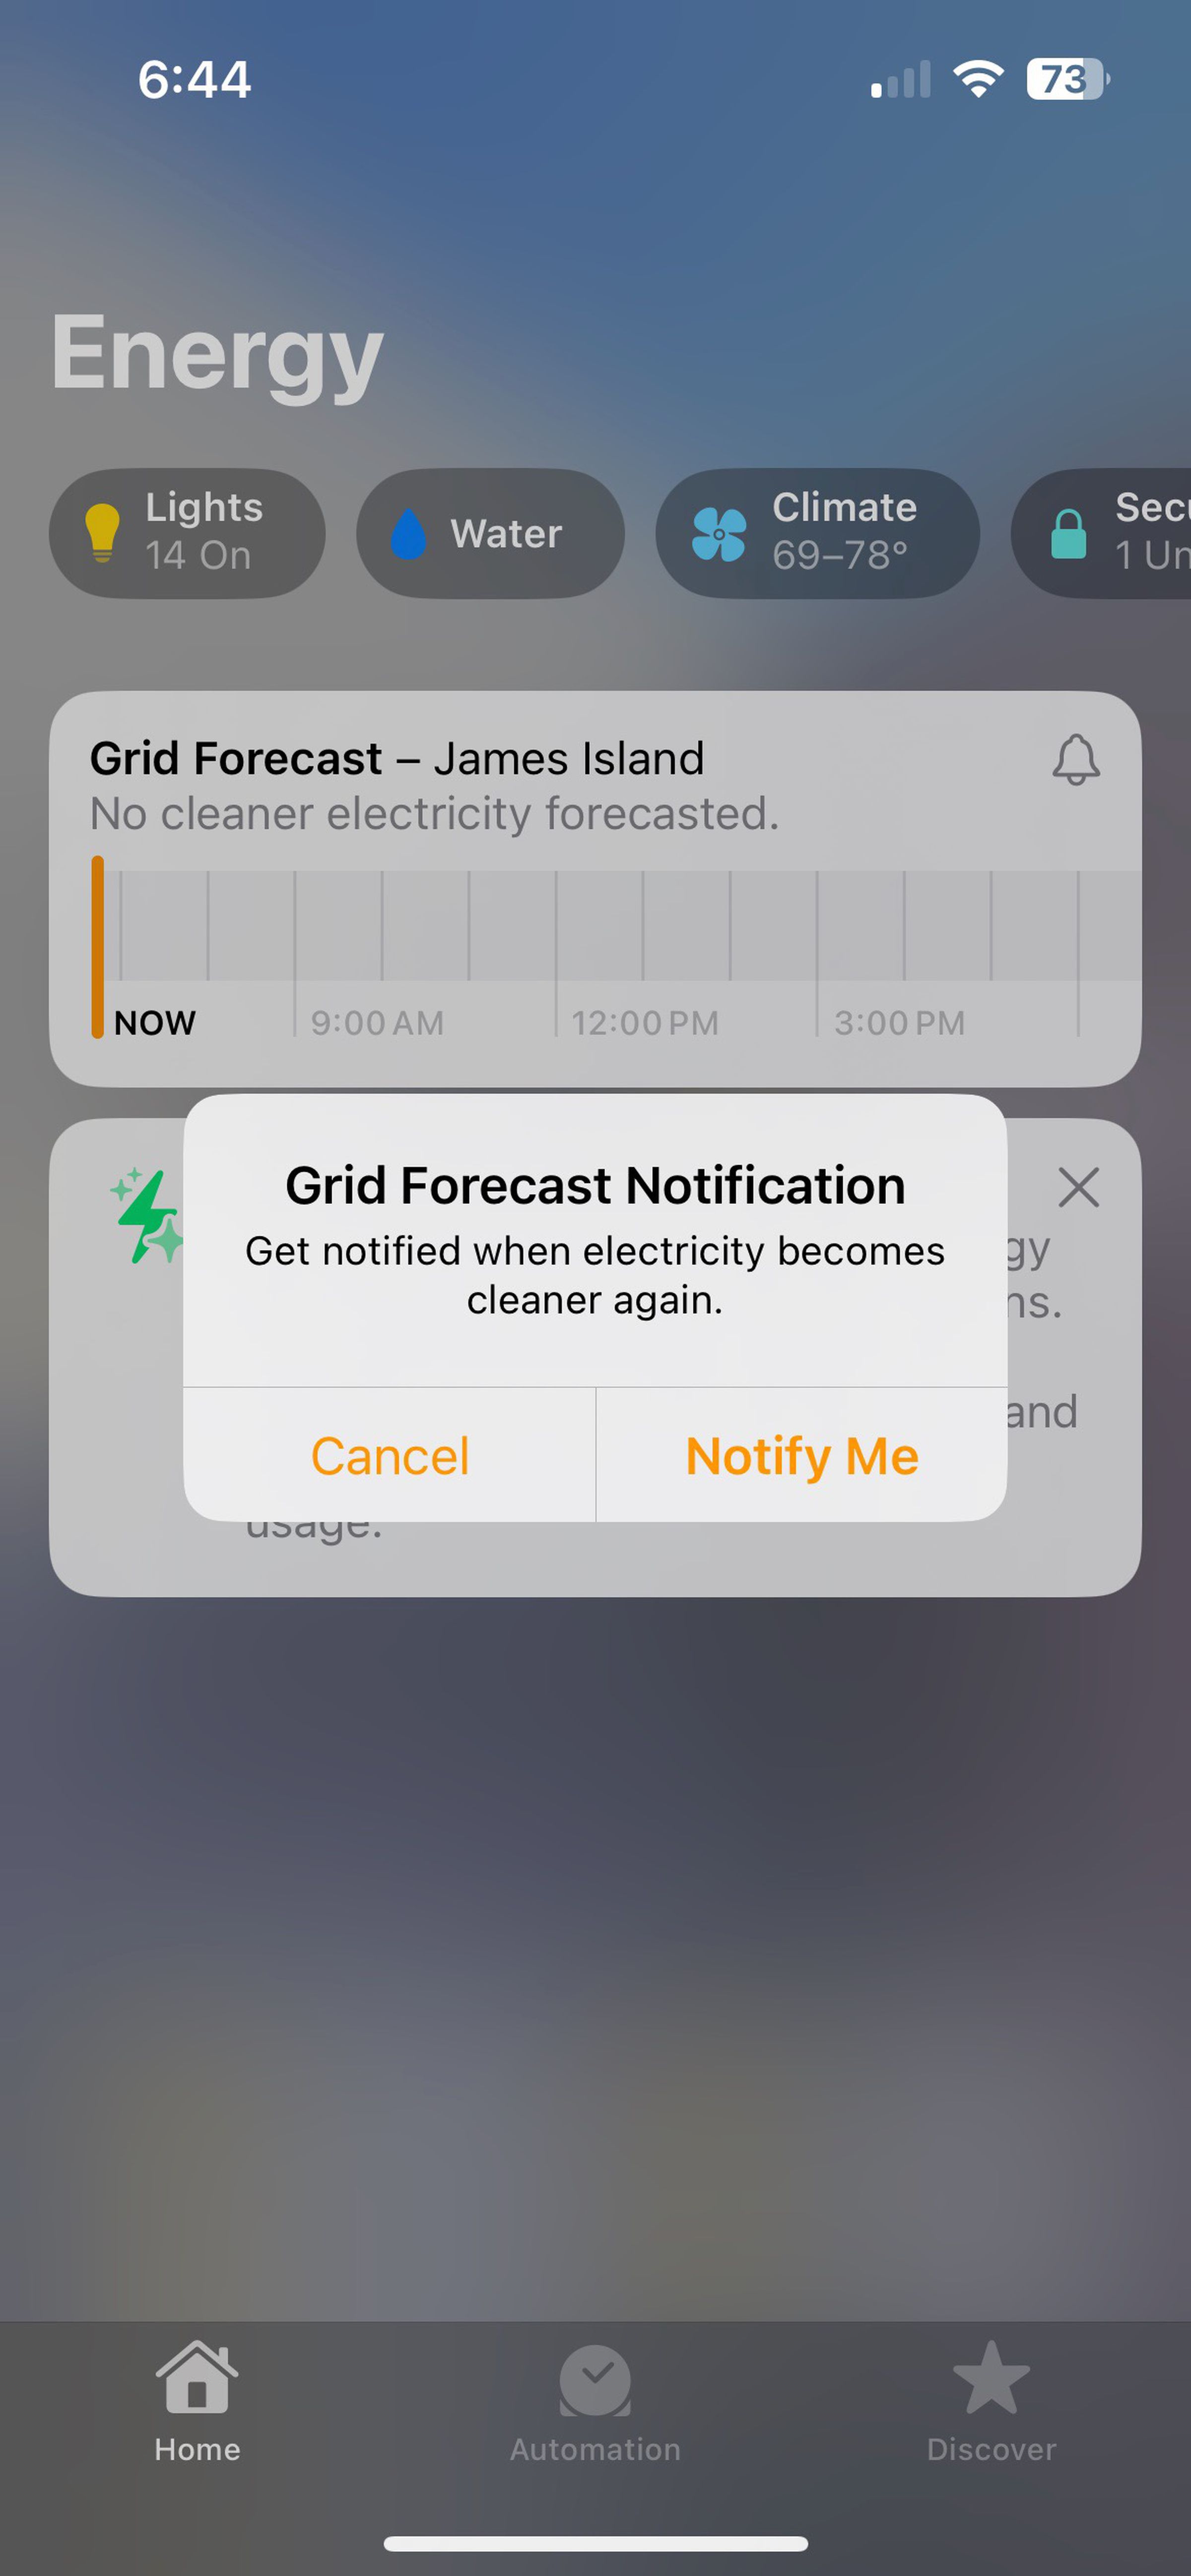 The first time you launch Grid Forecast you get an option to receive a notification when your energy is cleaner.